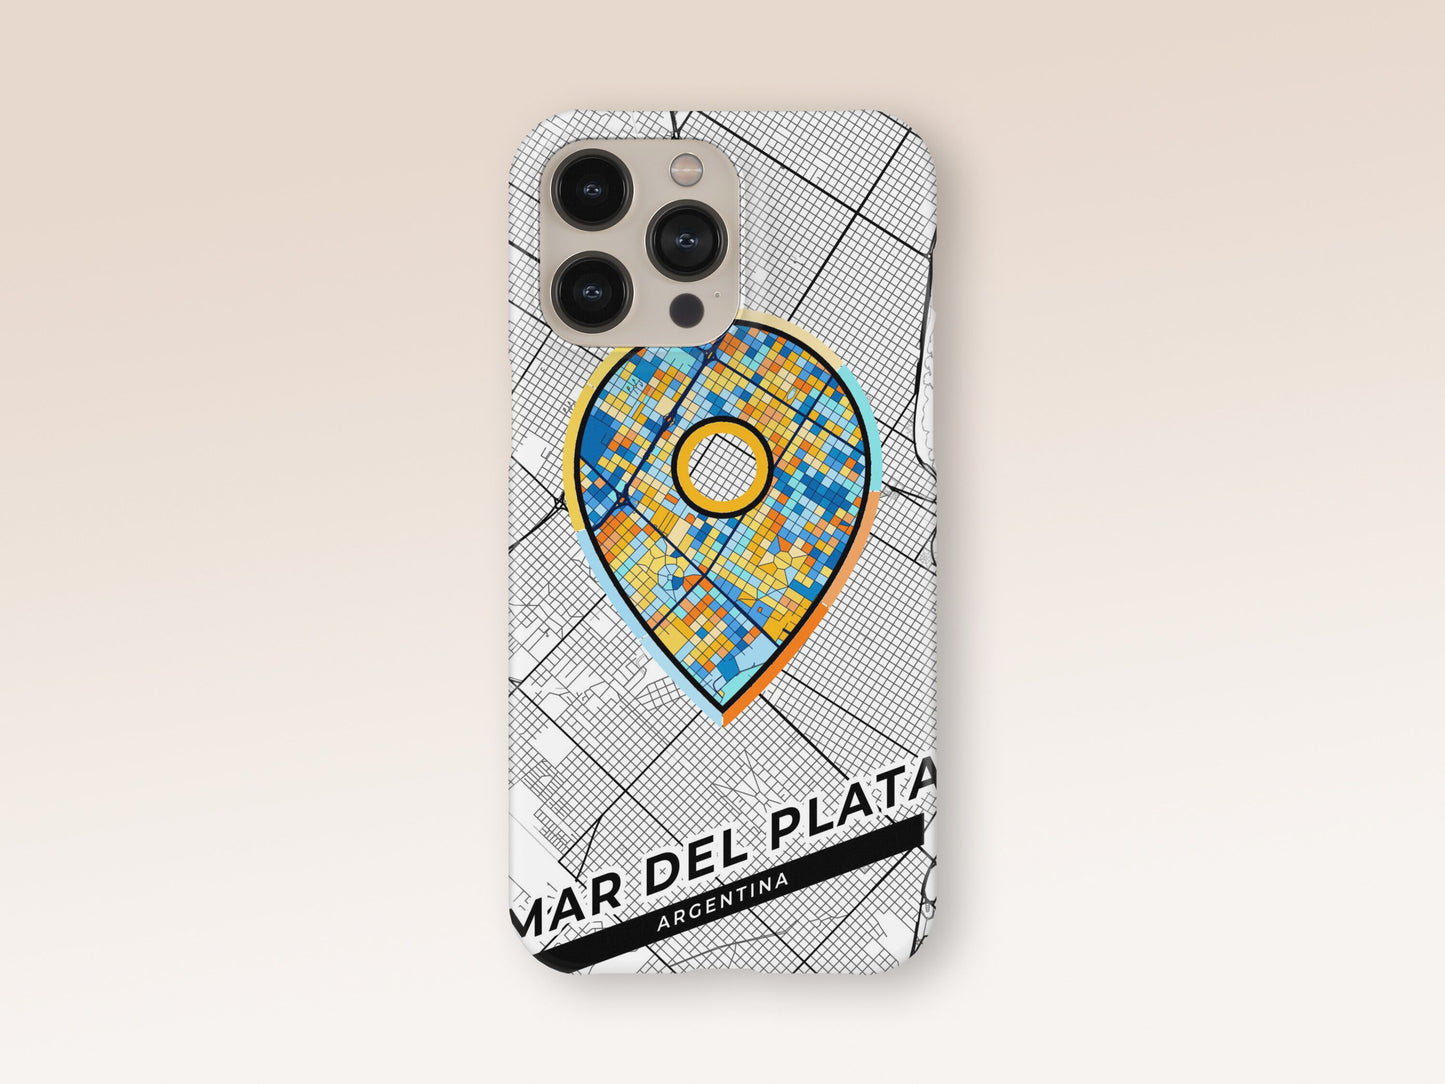 Mar Del Plata Argentina slim phone case with colorful icon. Birthday, wedding or housewarming gift. Couple match cases. 1